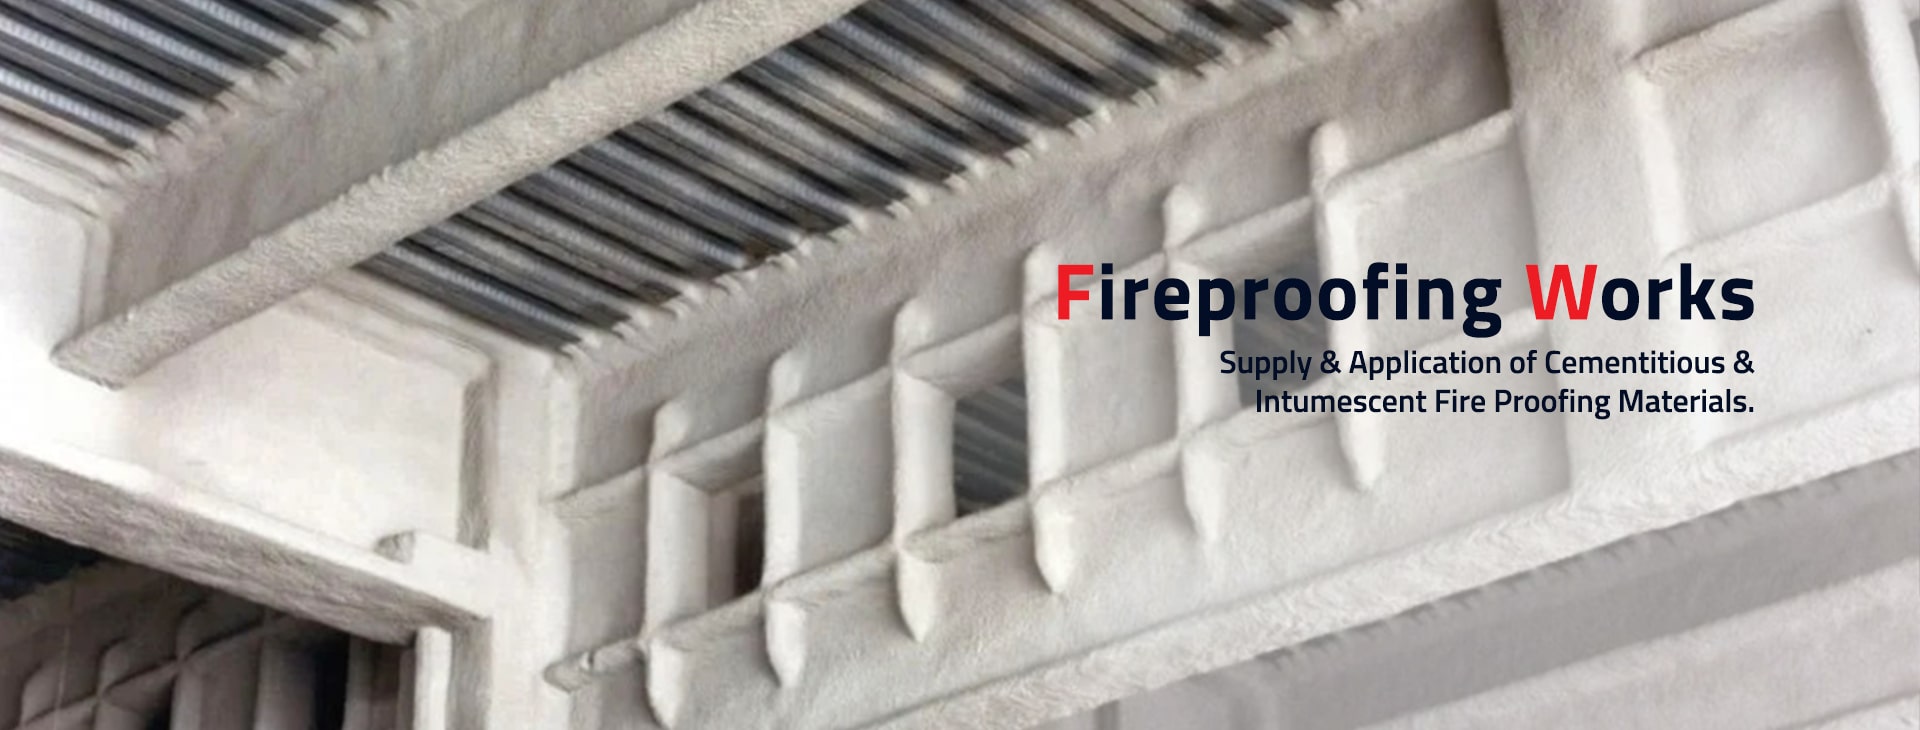 Fire Proofing Works